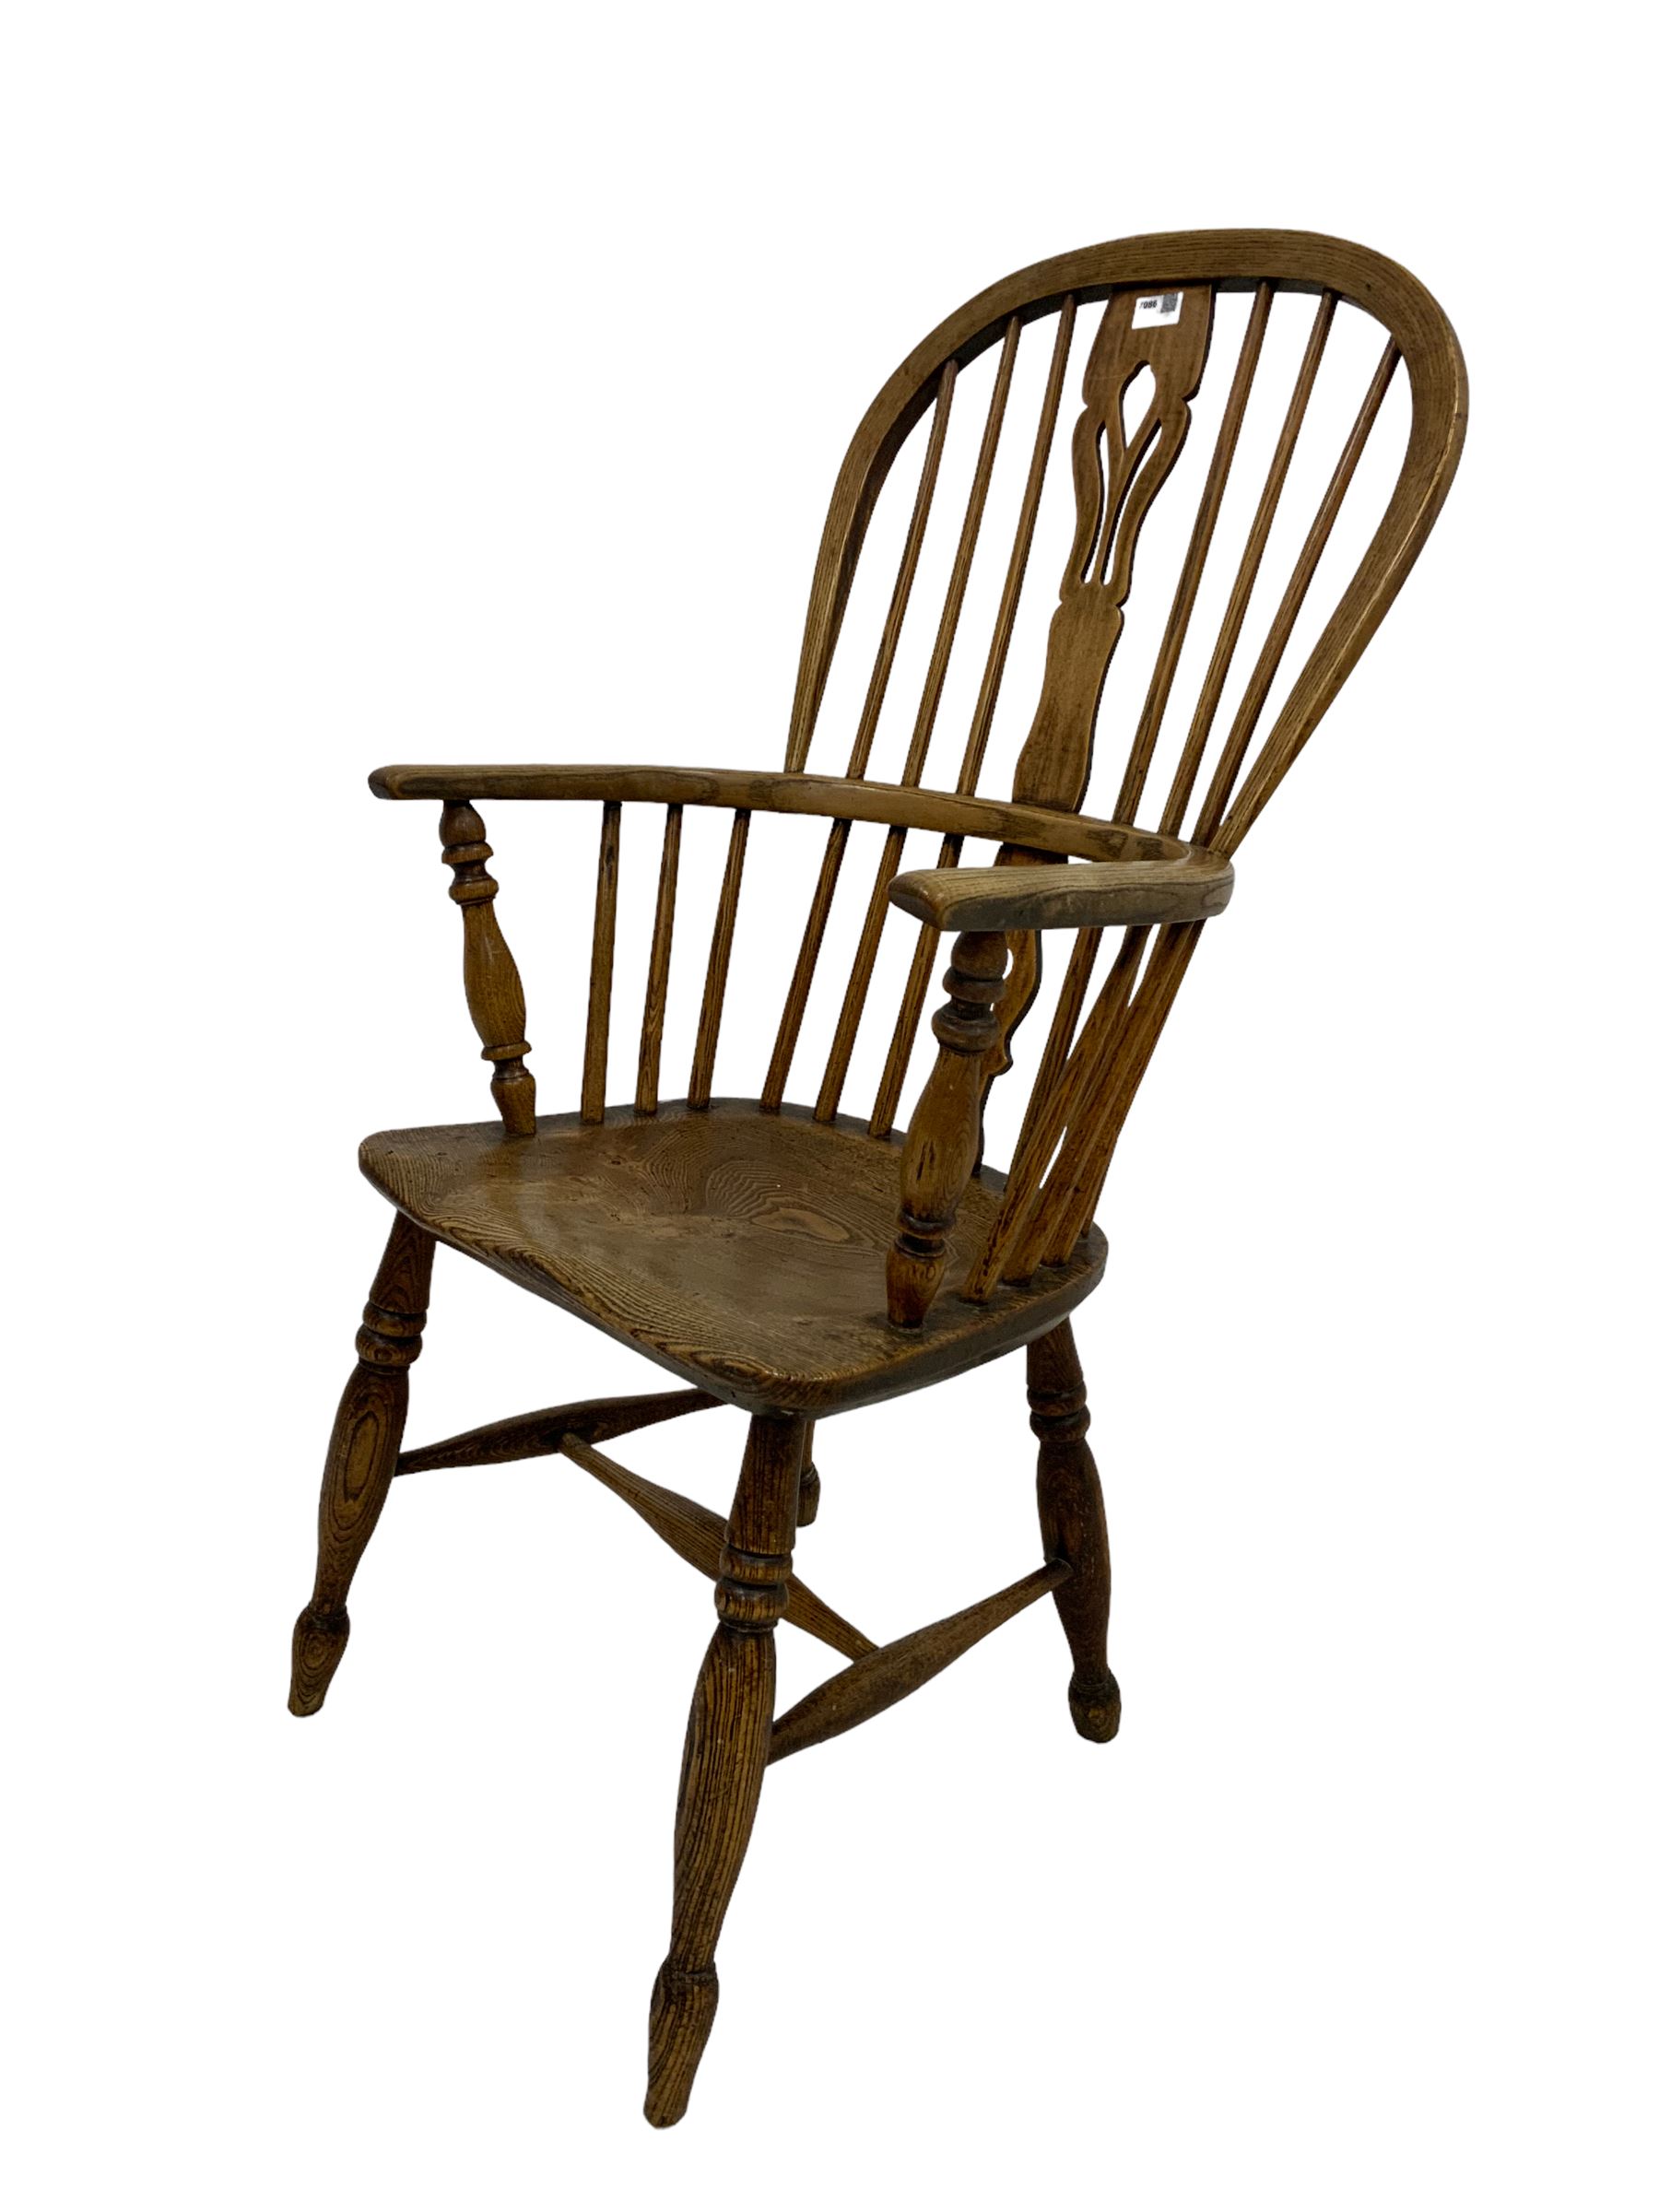 19th century elm Windsor chair - Image 2 of 4